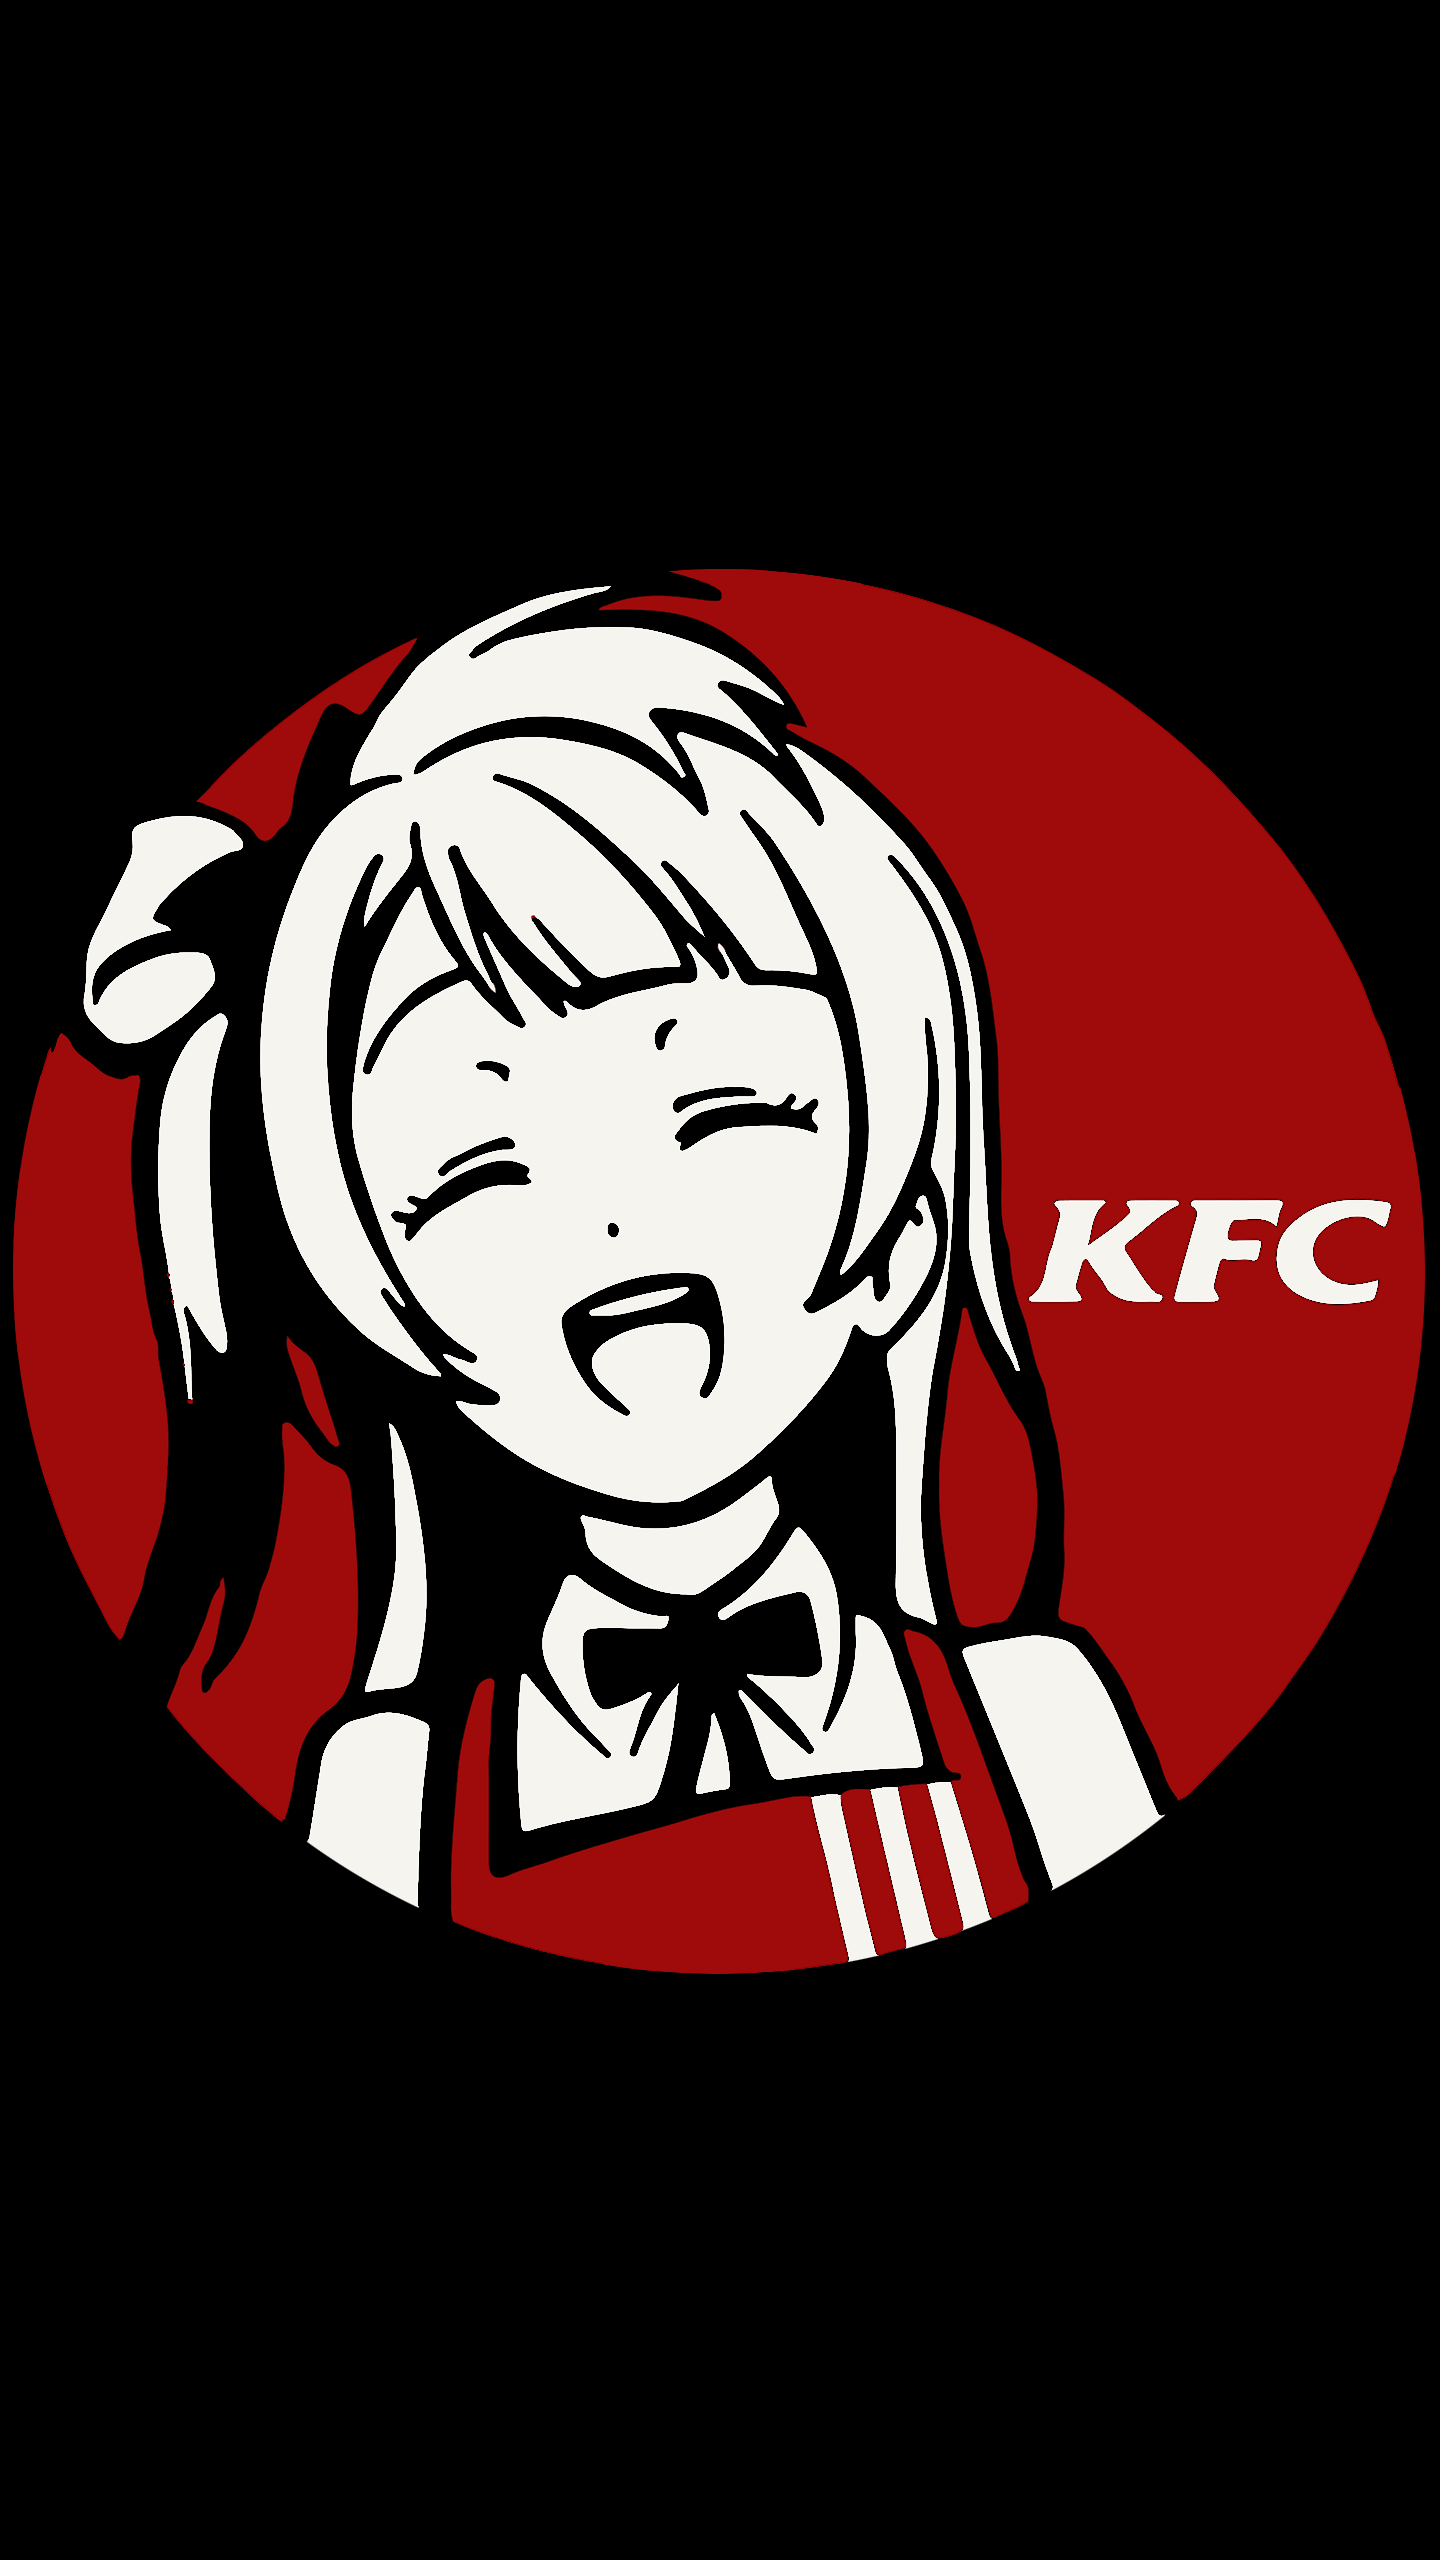 Anime KFC Logo Wallpaper Request (uncompressed image in comments)